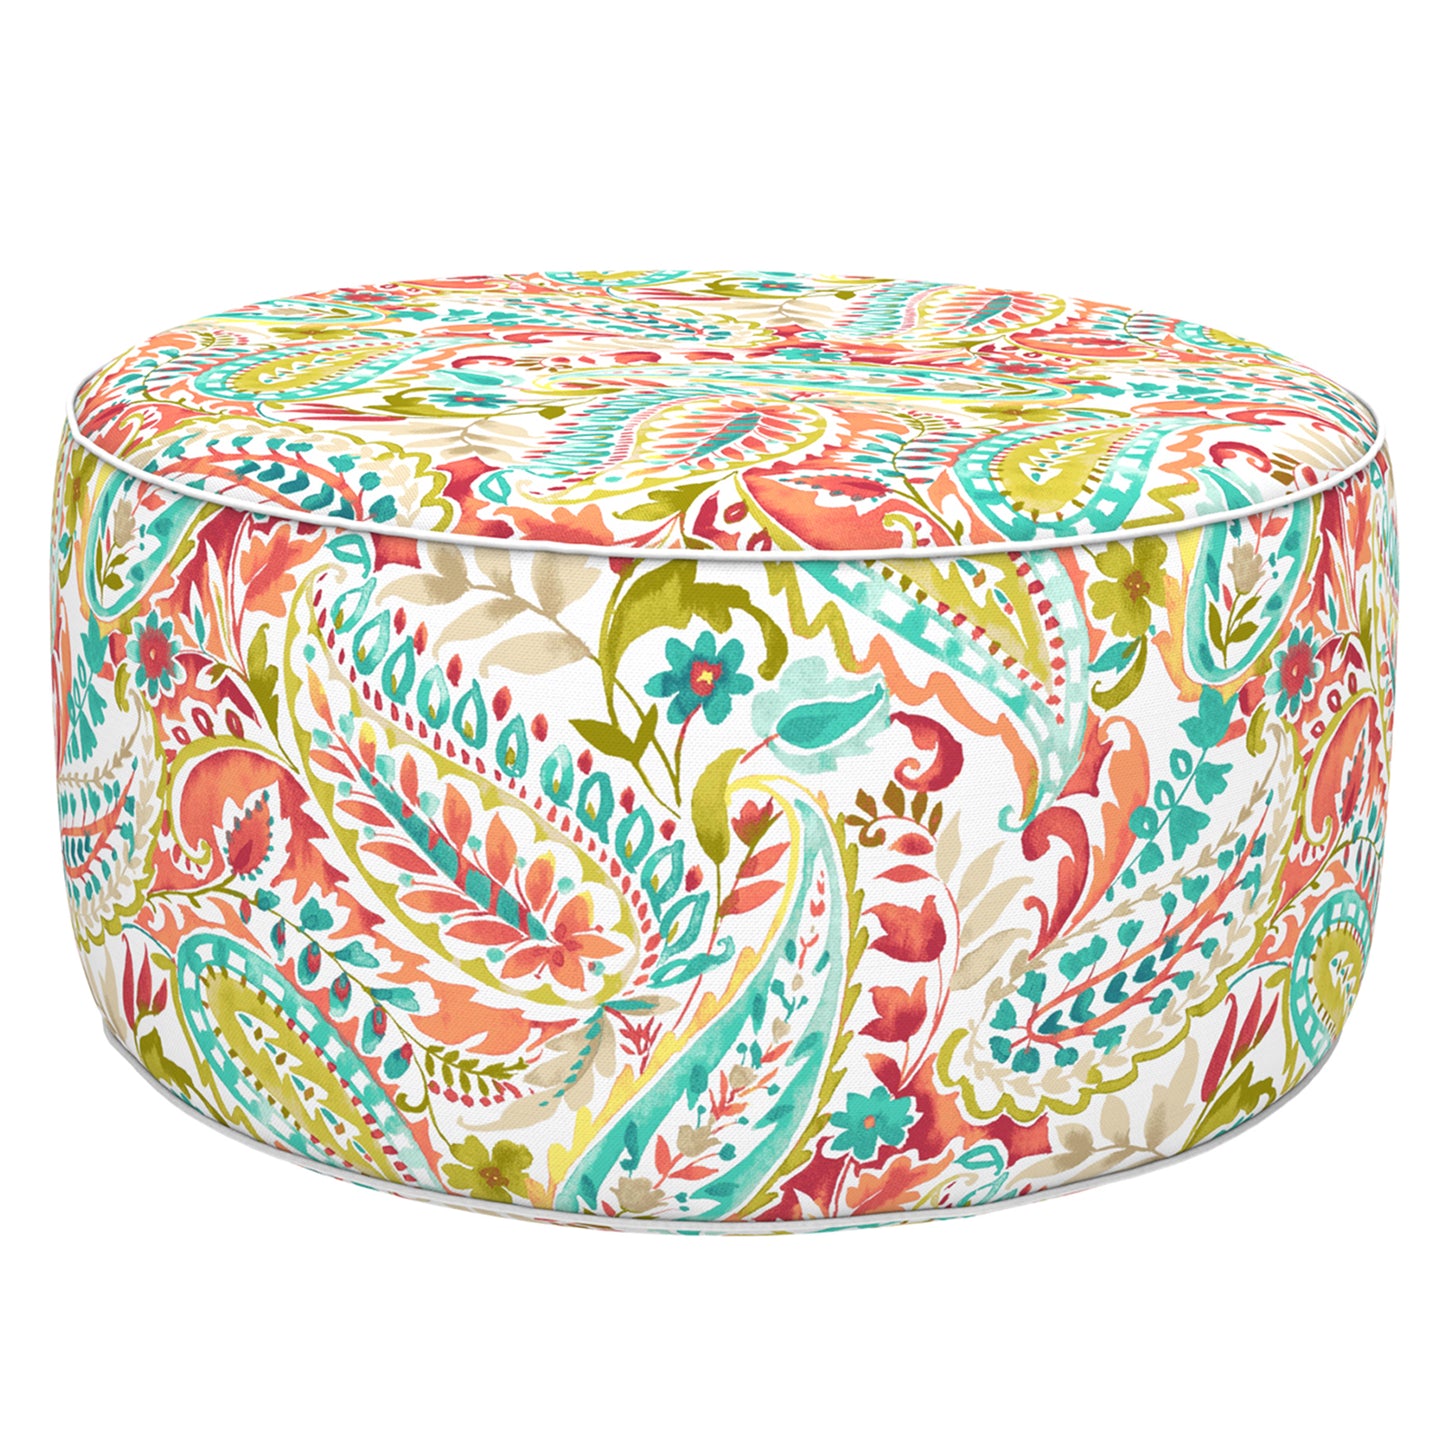 Outdoor Inflatable Stool Ottoman, All Weather Portable Footrest Stool, Furniture Stool Ottomans for Home Garden Beach, D31”xH14”, Pretty Paisley